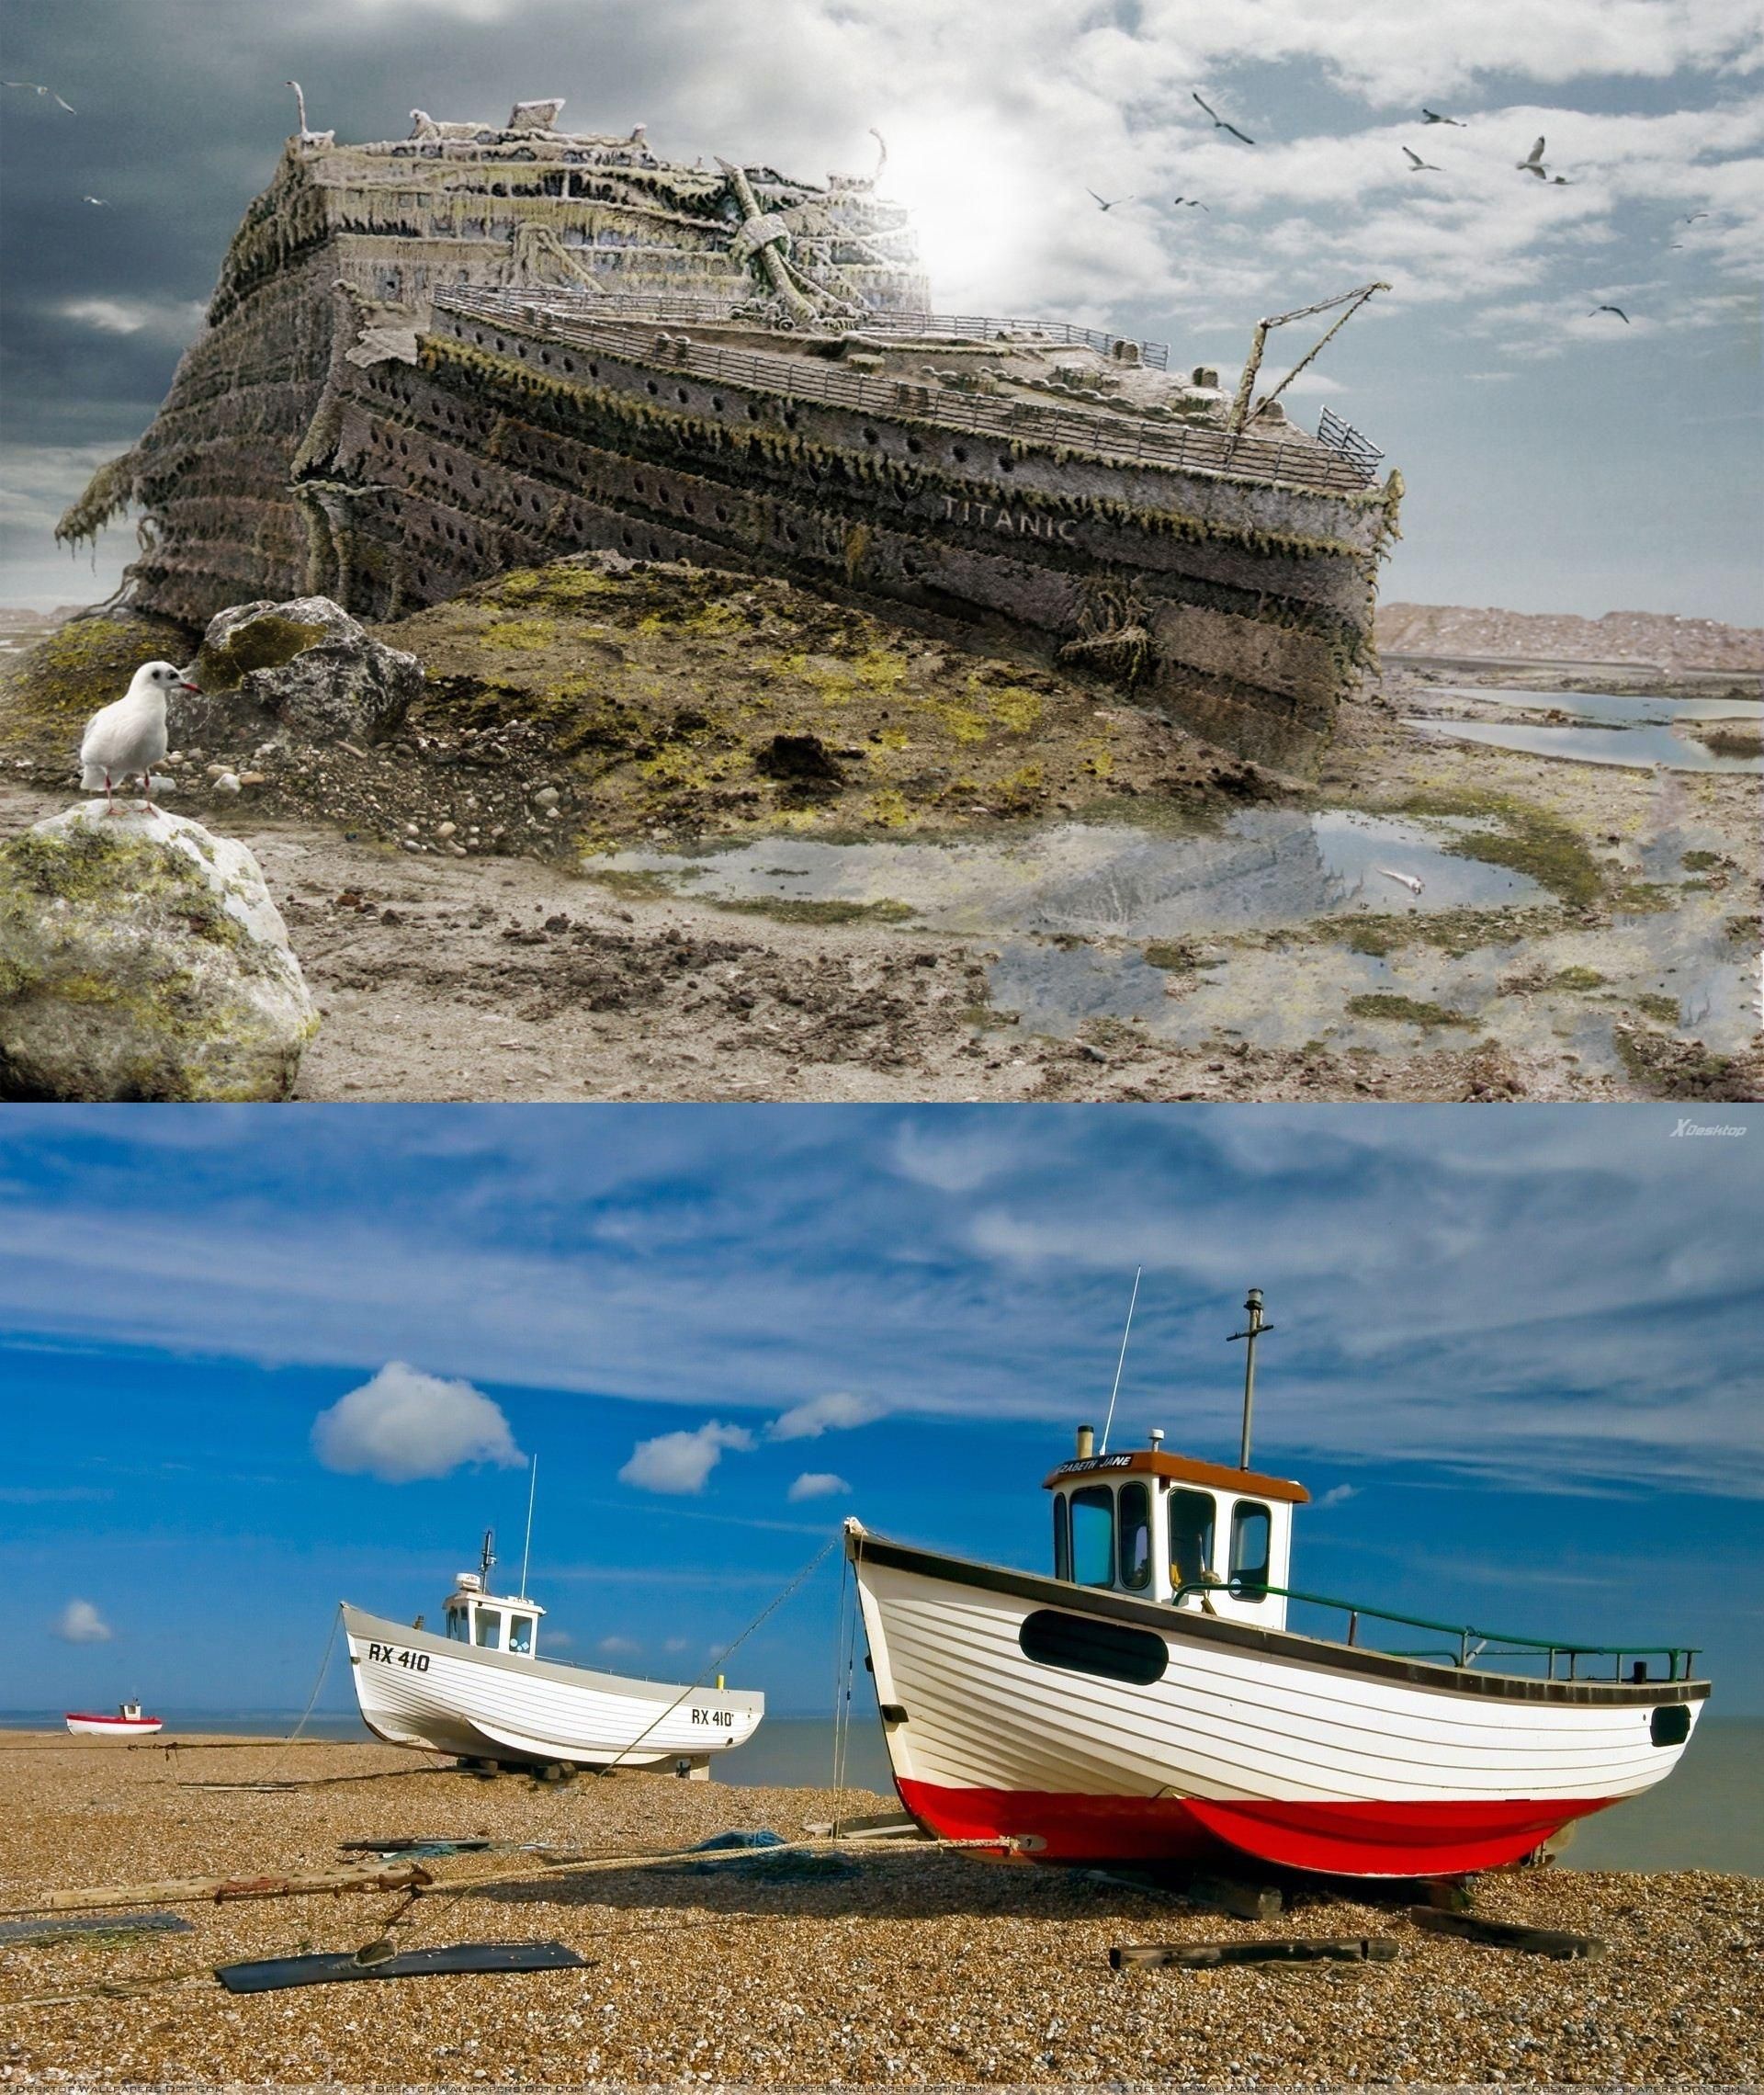 old boat aground on the coast | Boats on the Hard, Ships on Land ...